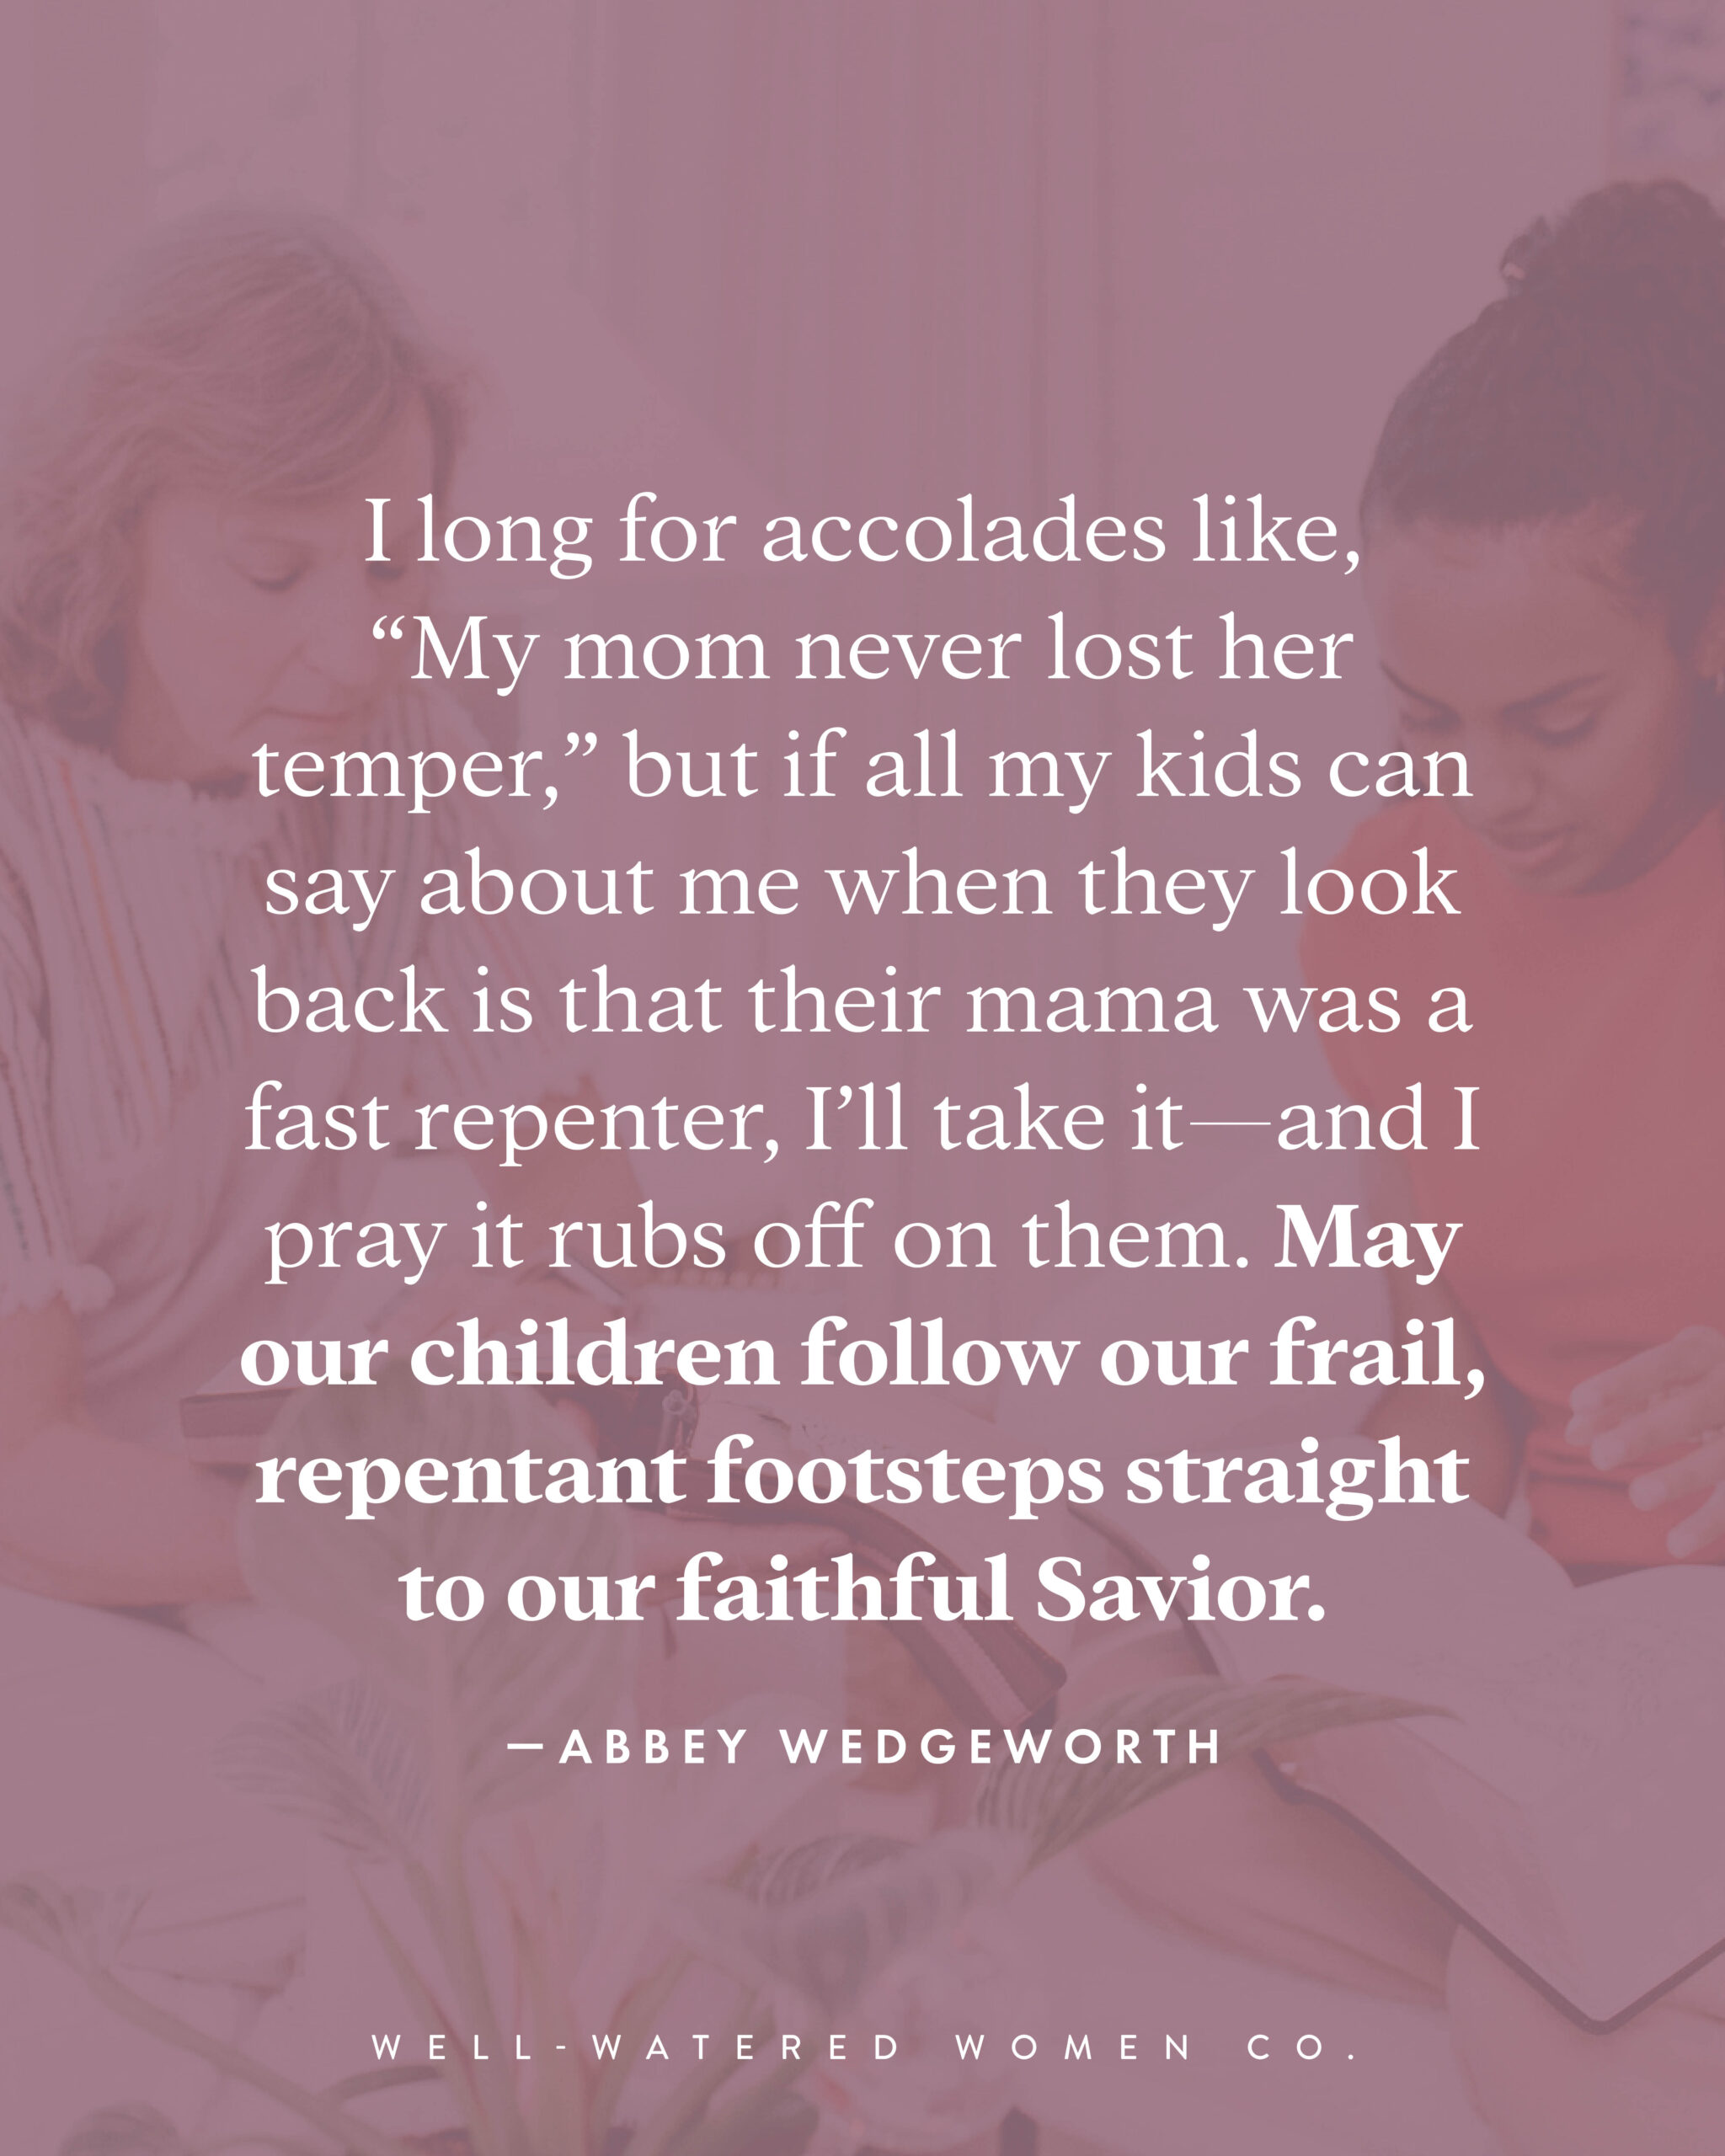 Moms, Use Your Failures for Discipleship - an article from Well-Watered Women - quote